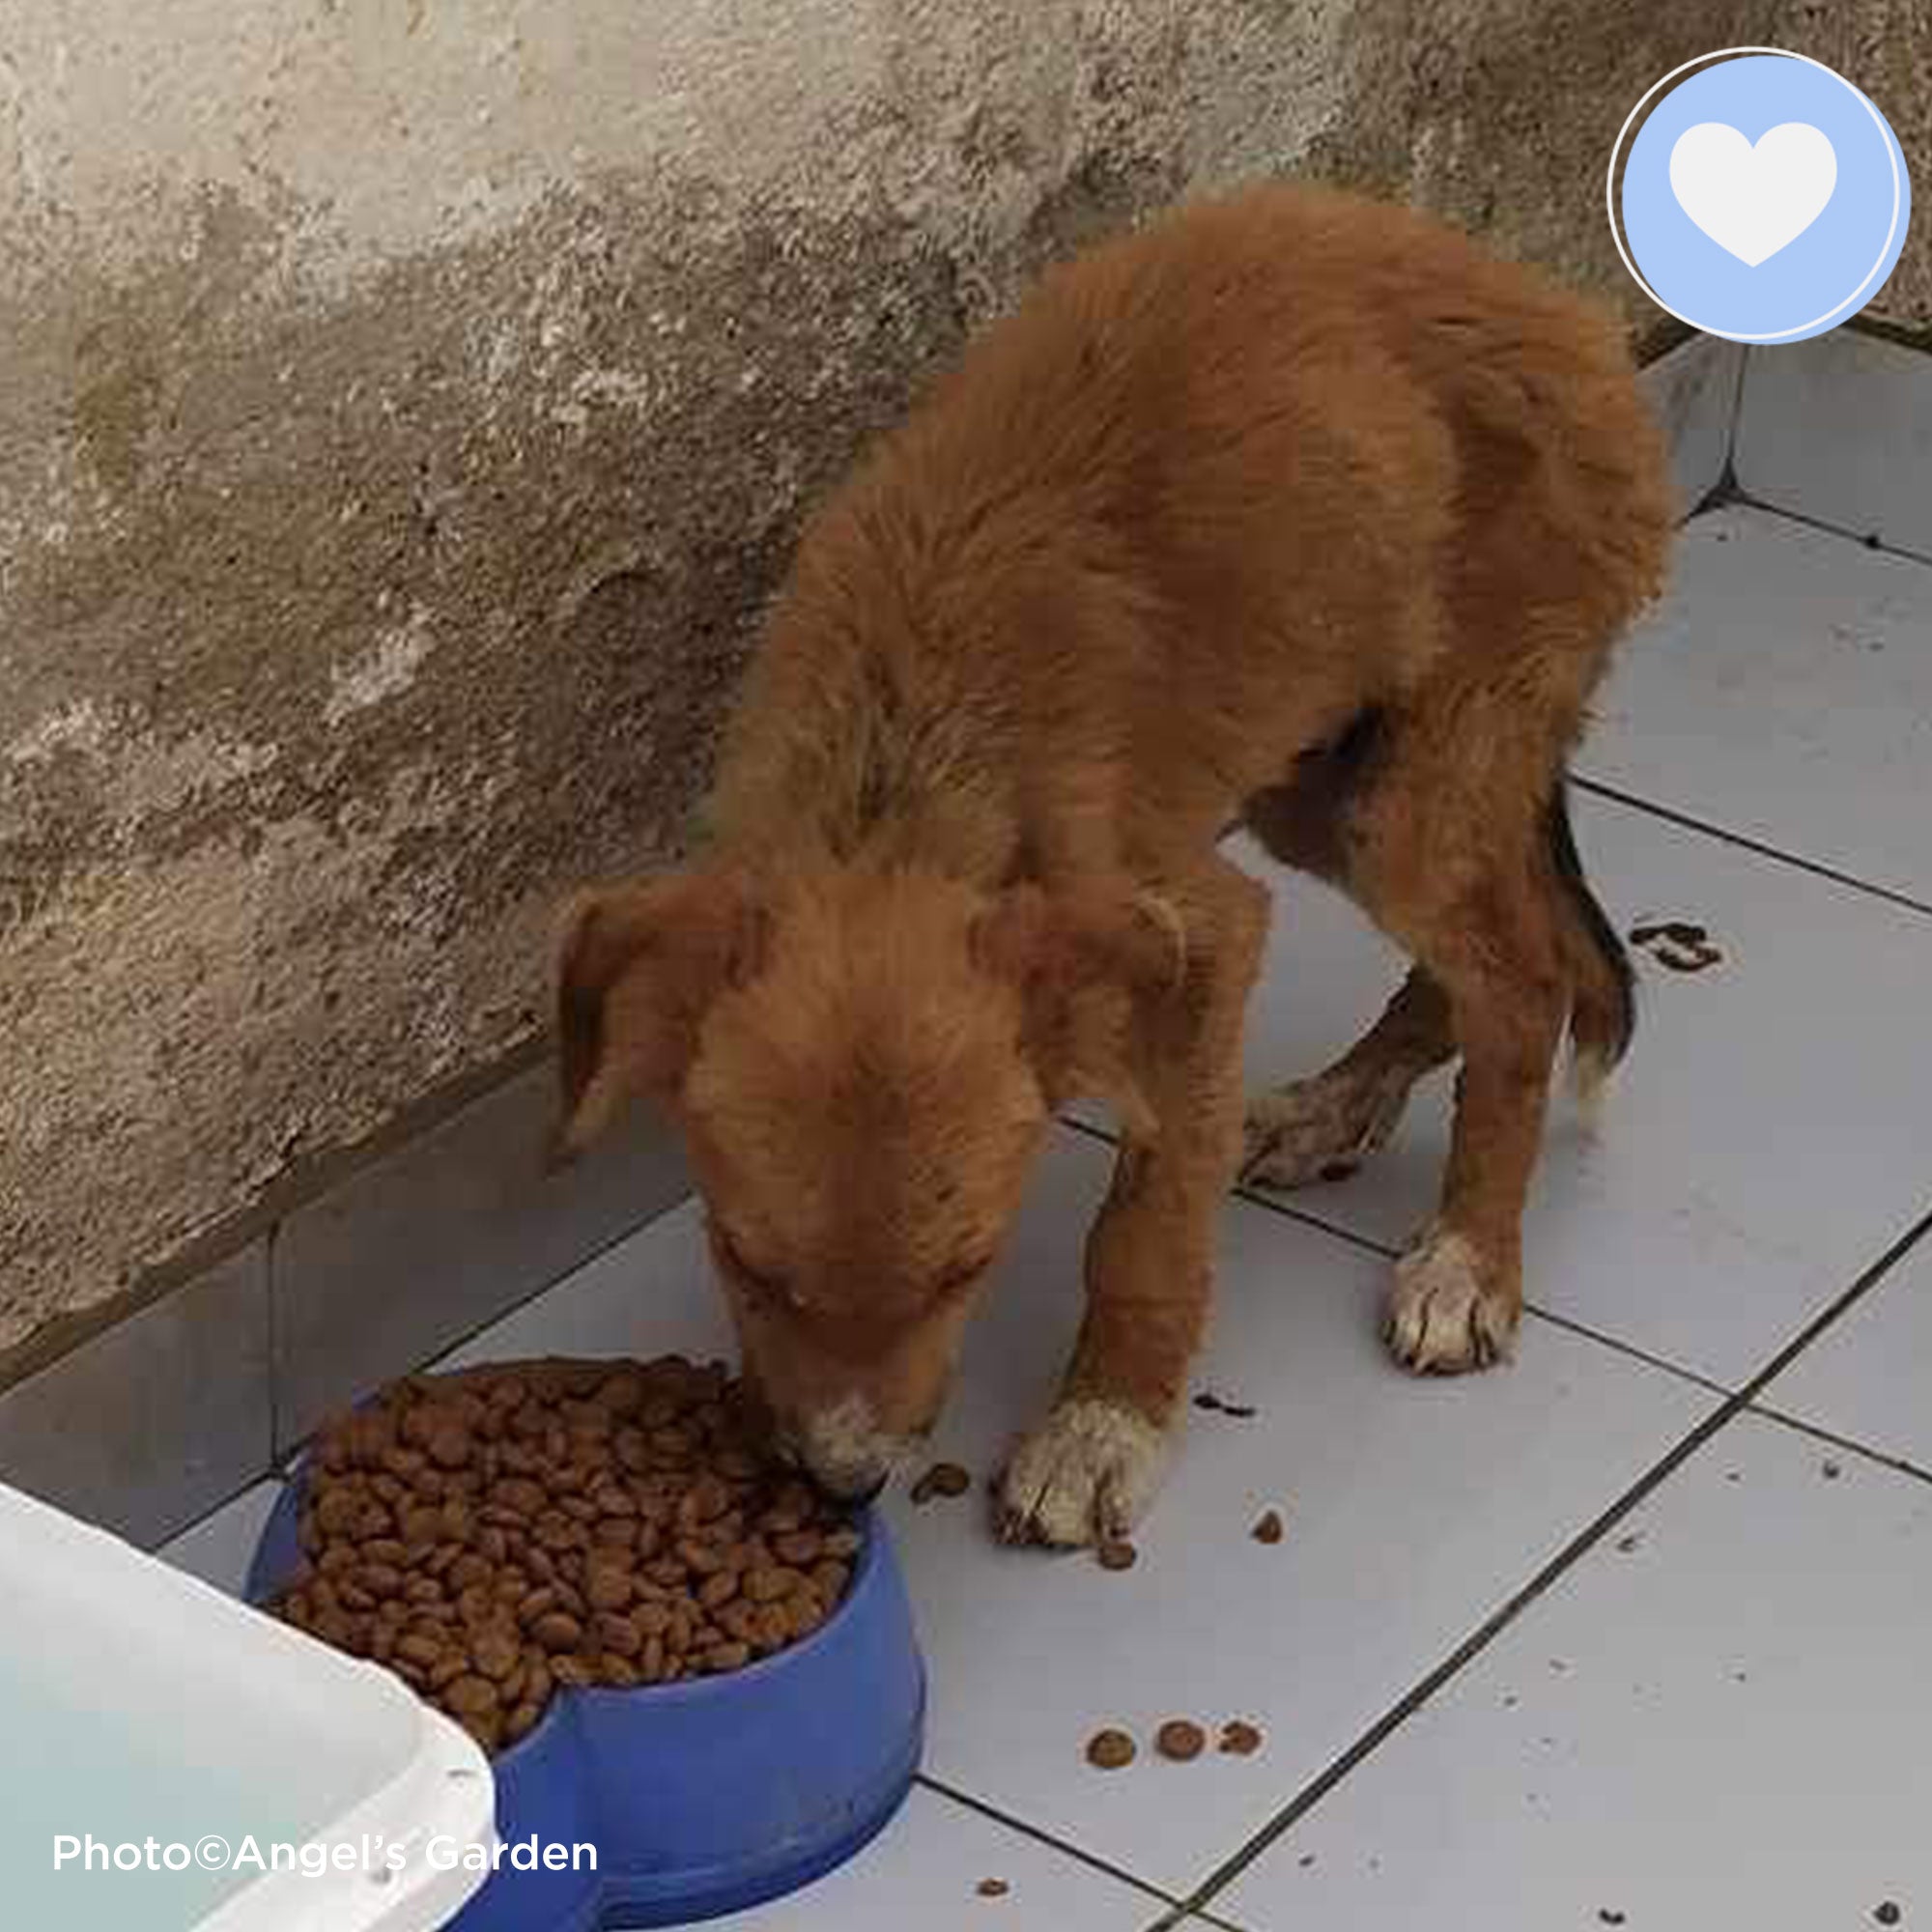 Funded: Help Ares Overcome Sickness and Starvation